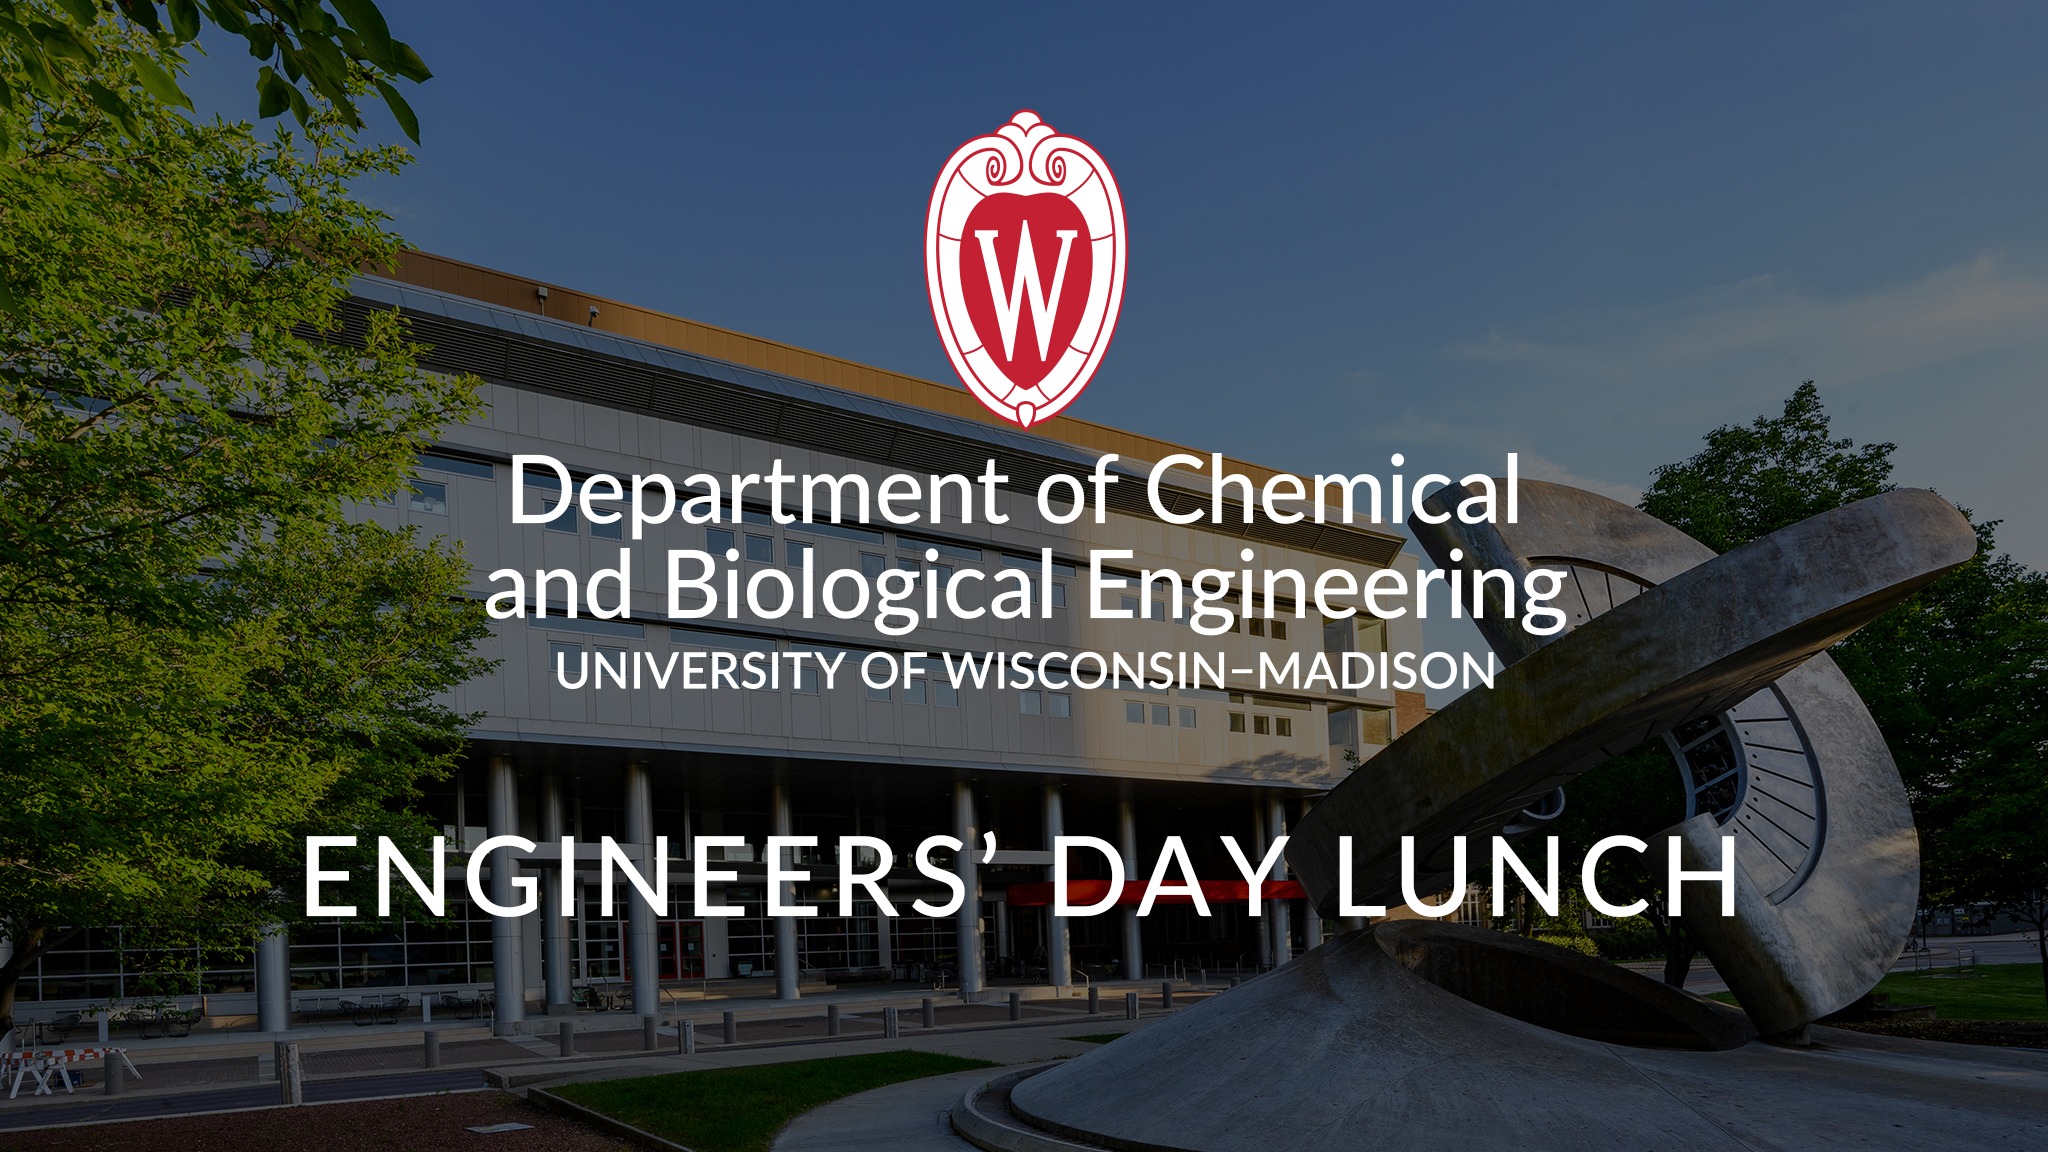 photo of Engineering Hall with text Engineers' Day Lunch and UW seal